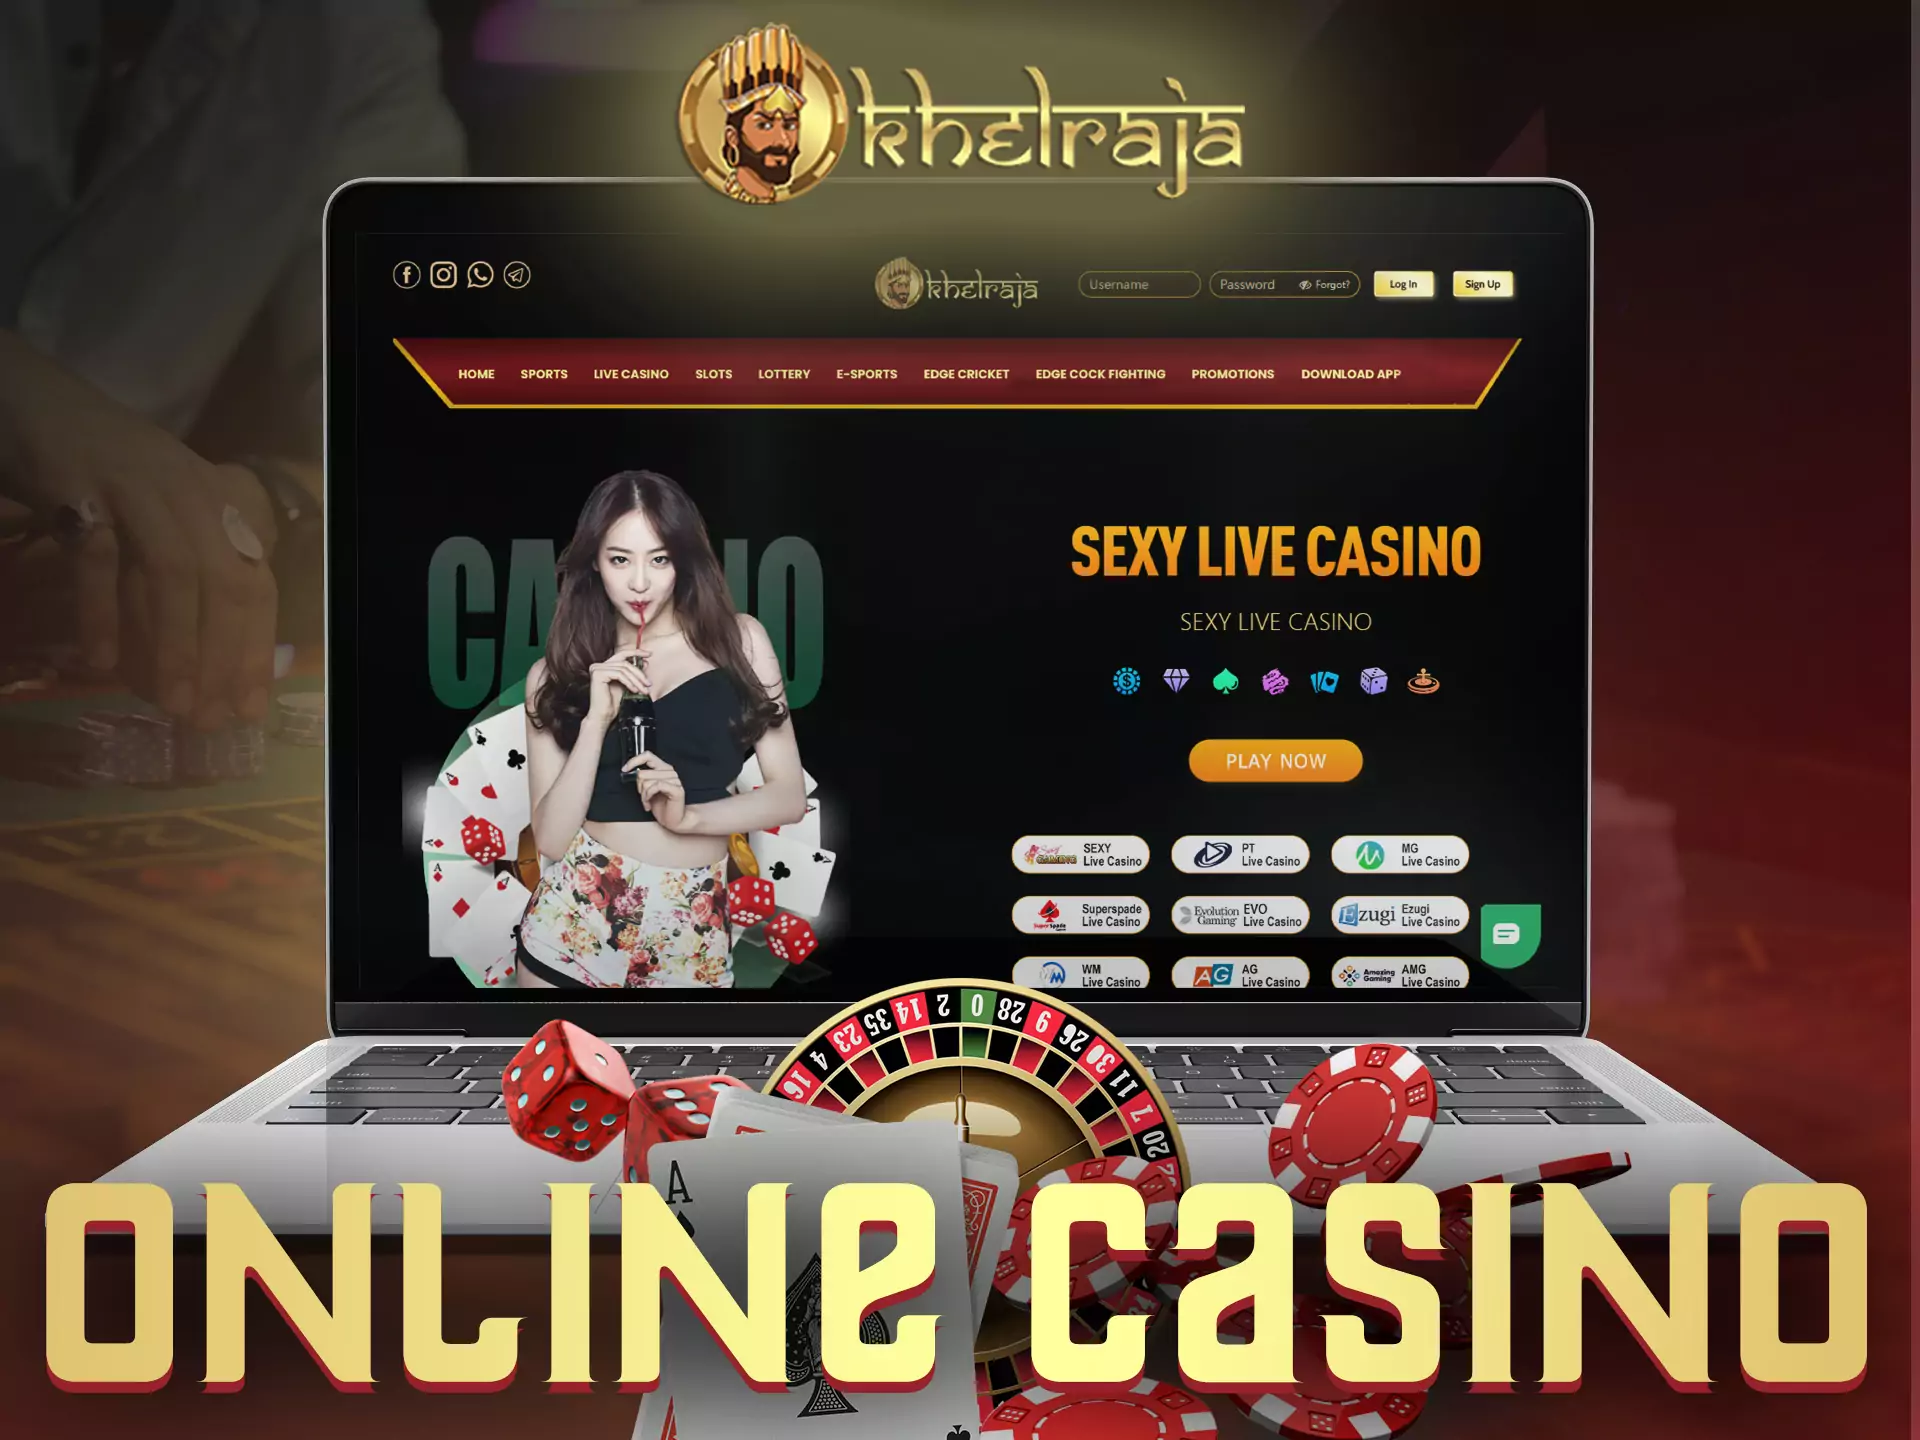 On the Khelraja there is a lot of casino entertainment from slots to table games in the live section.